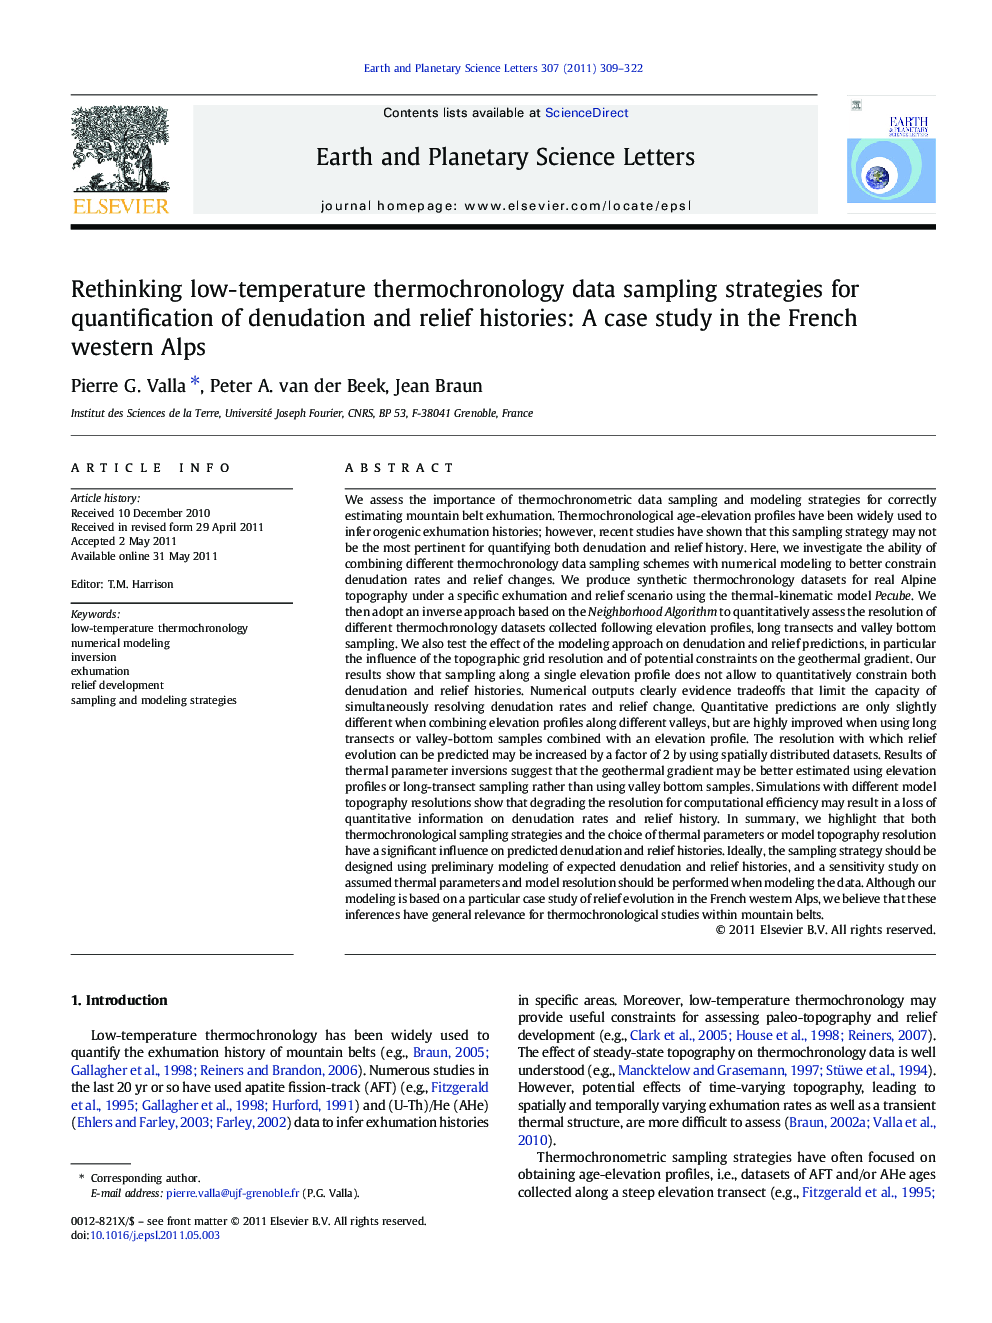 Rethinking low-temperature thermochronology data sampling strategies for quantification of denudation and relief histories: A case study in the French western Alps